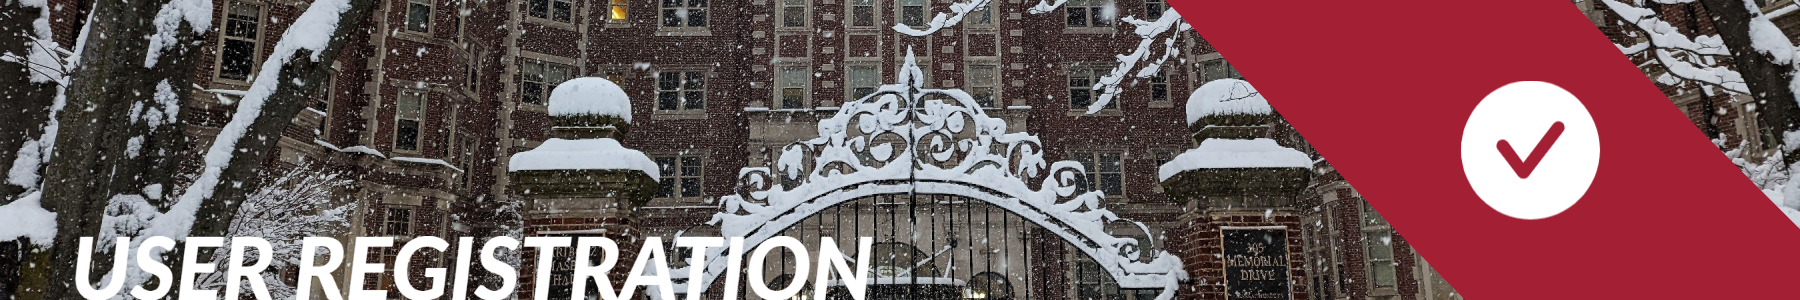 Image of Maseeh Hall outside during the winter with snow on the metal gate with words "User Registration"